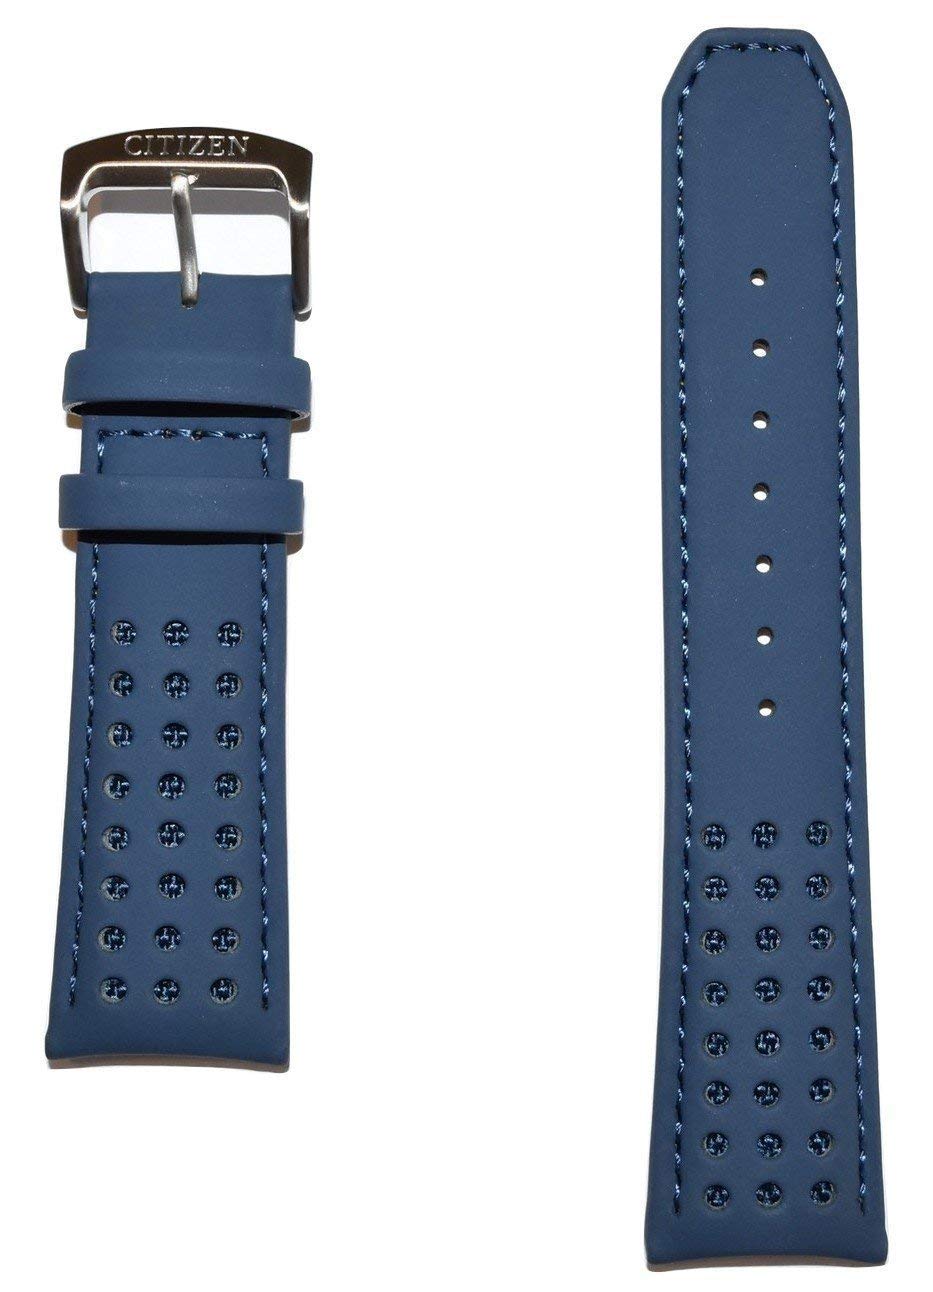 Original Citizen Blue Angels 23mm Blue Leather Band Strap For Watch Model: AT8020-03L